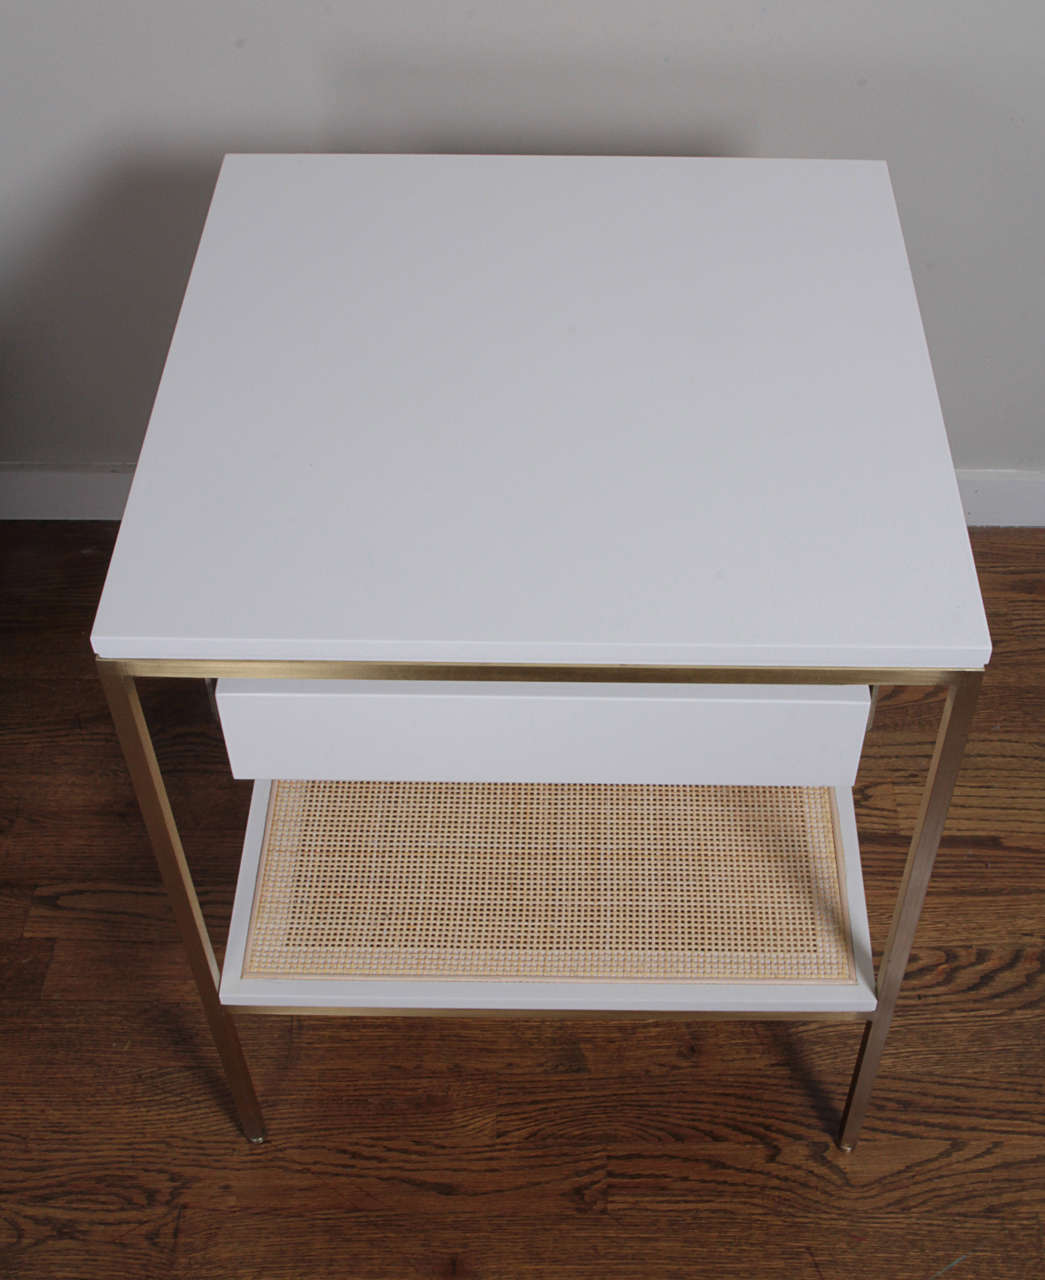 Minimalist re: 392 Bedside Tables in Soft Chamois gloss on satin brass frames. For Sale